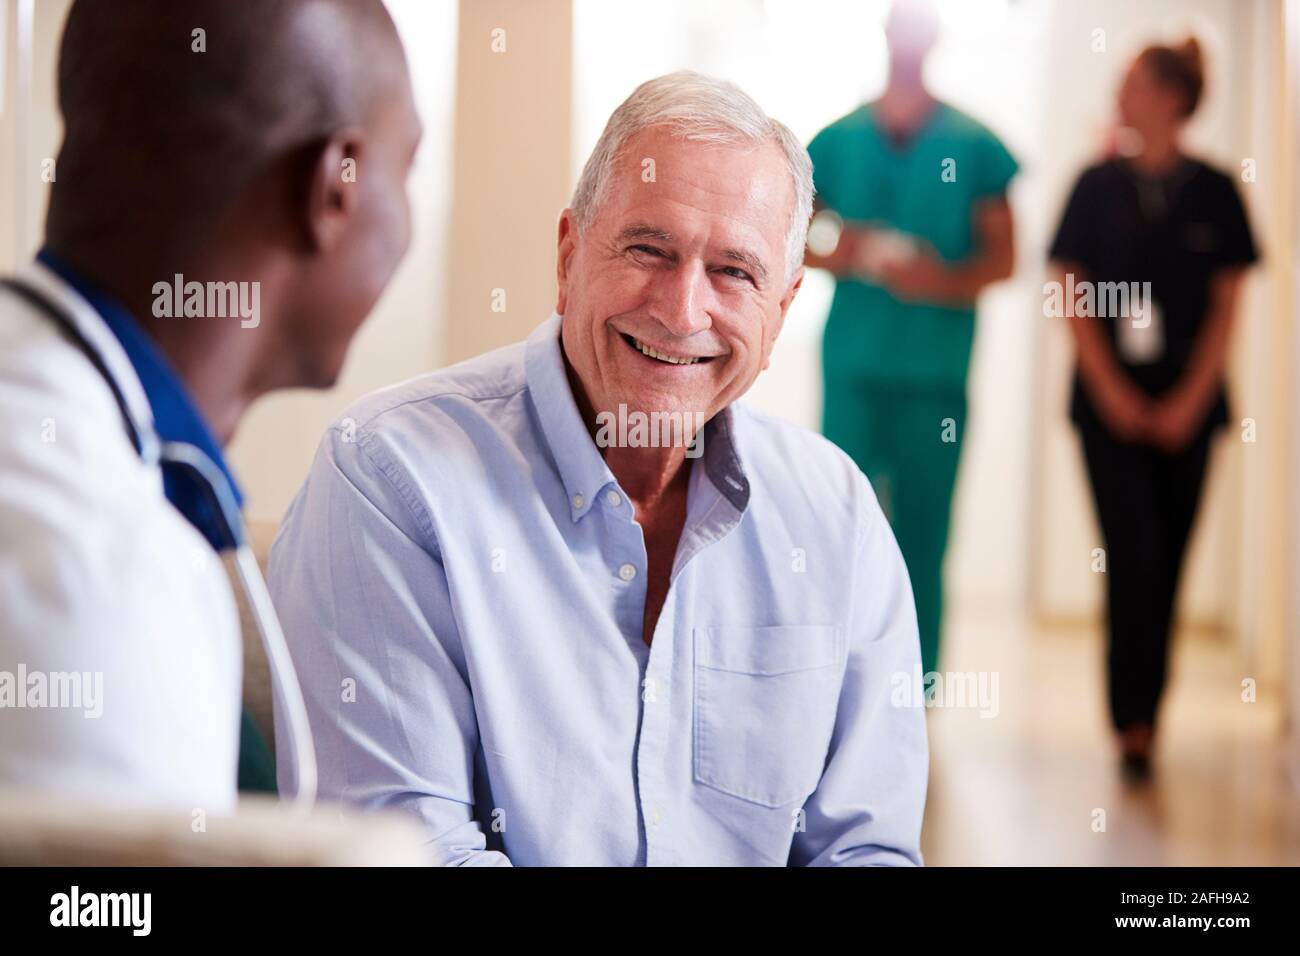 Doctor Welcoming To Senior Male Patient Being Admitted To Hospital Stock Photo